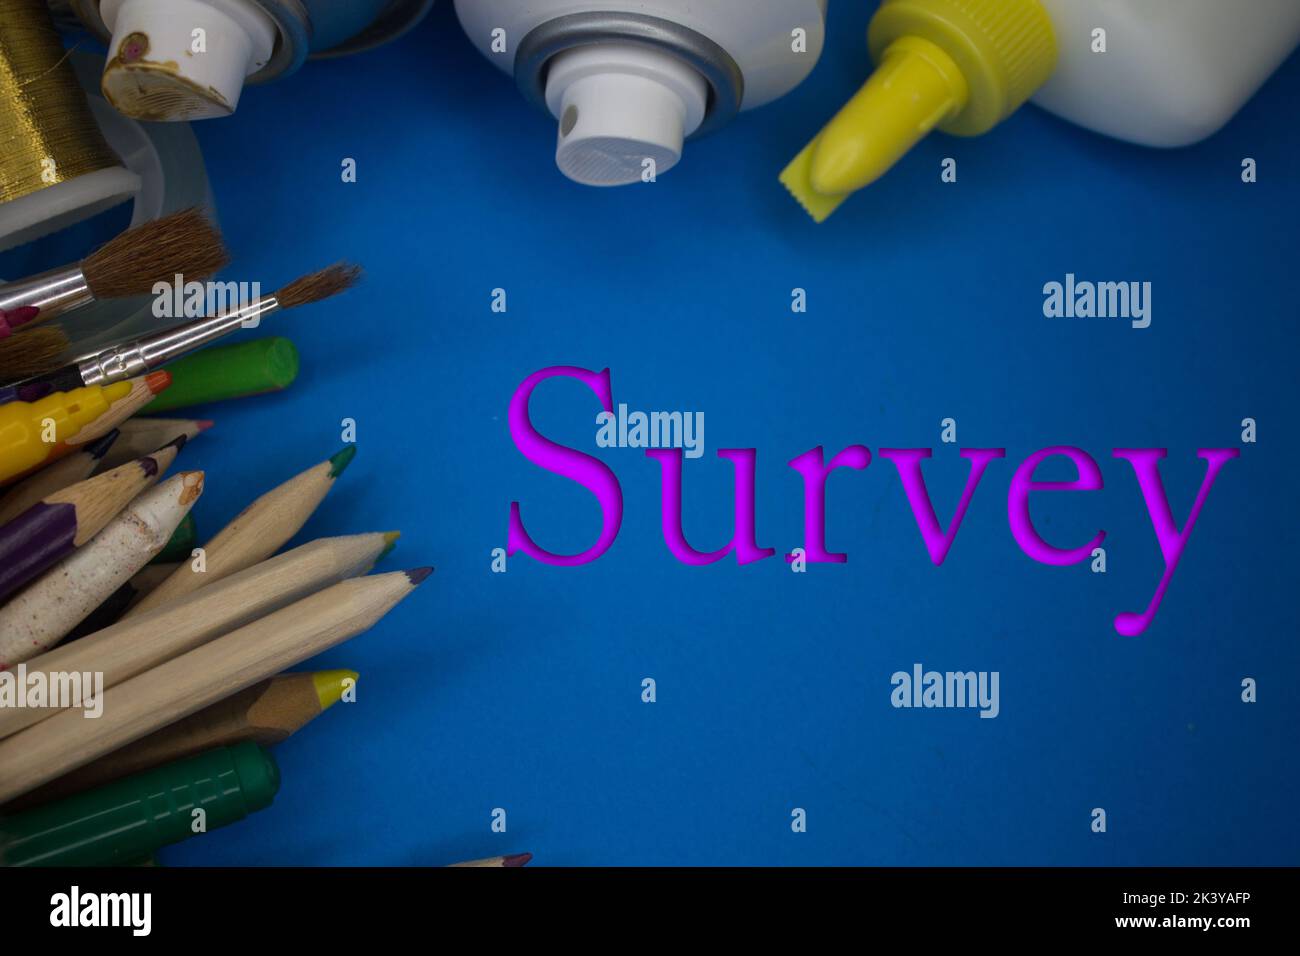 Overhead shot of school supplies with Survey text. Brushes, pencils, artistic tools. Art And Craft Work Tools. Stock Photo